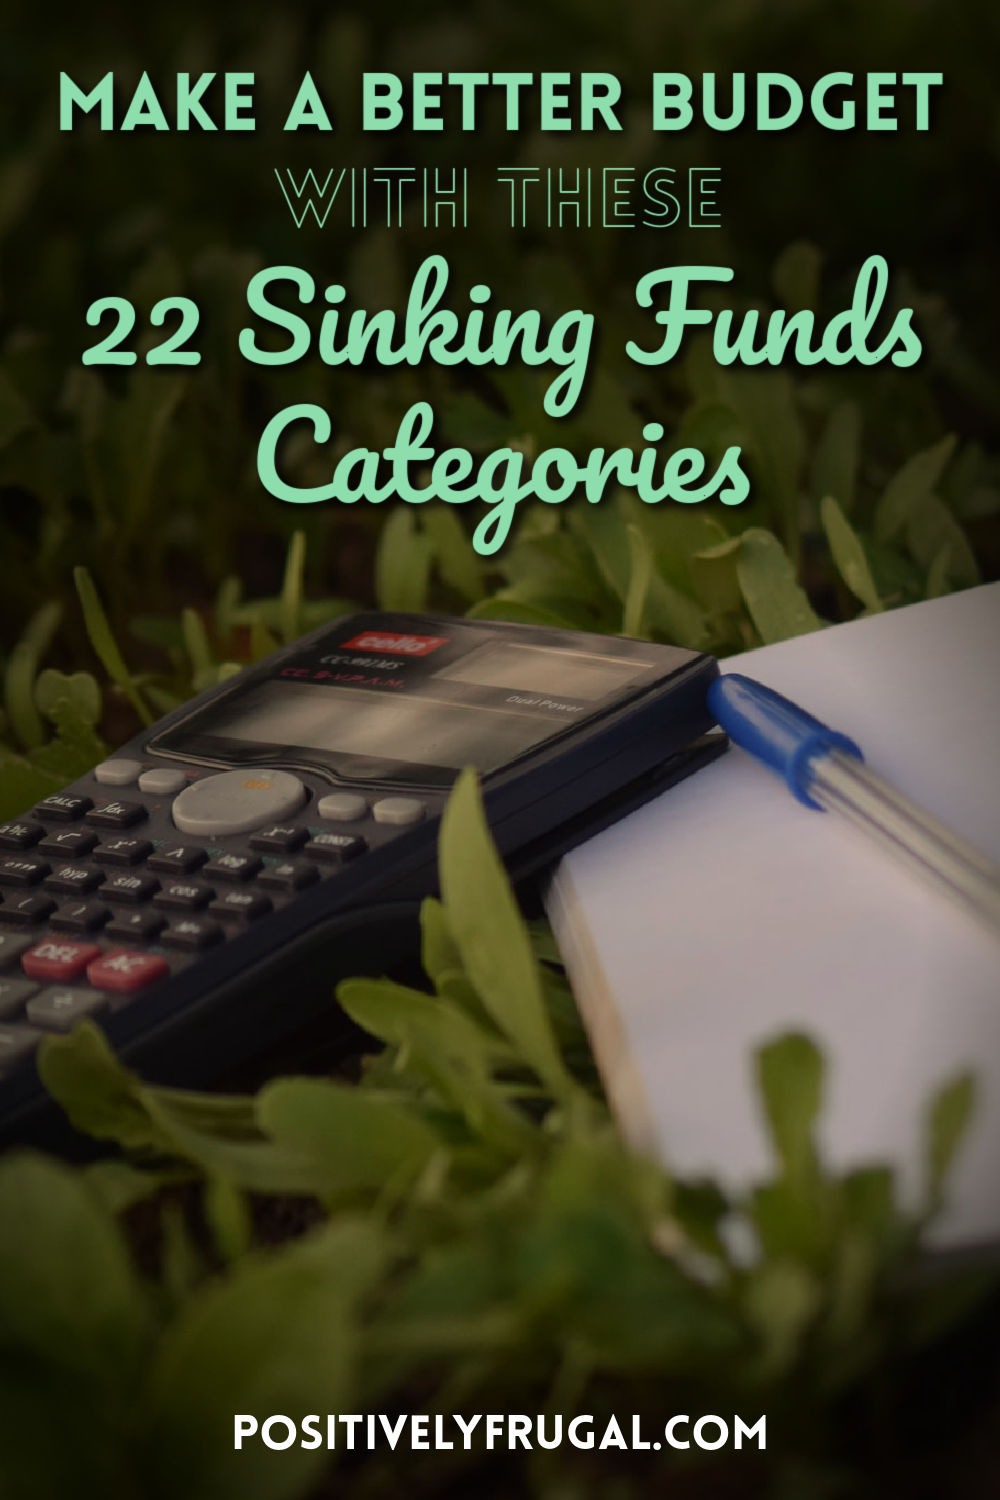 Make a Better Budget with Sinking Funds Categories by PositivelyFrugal.com